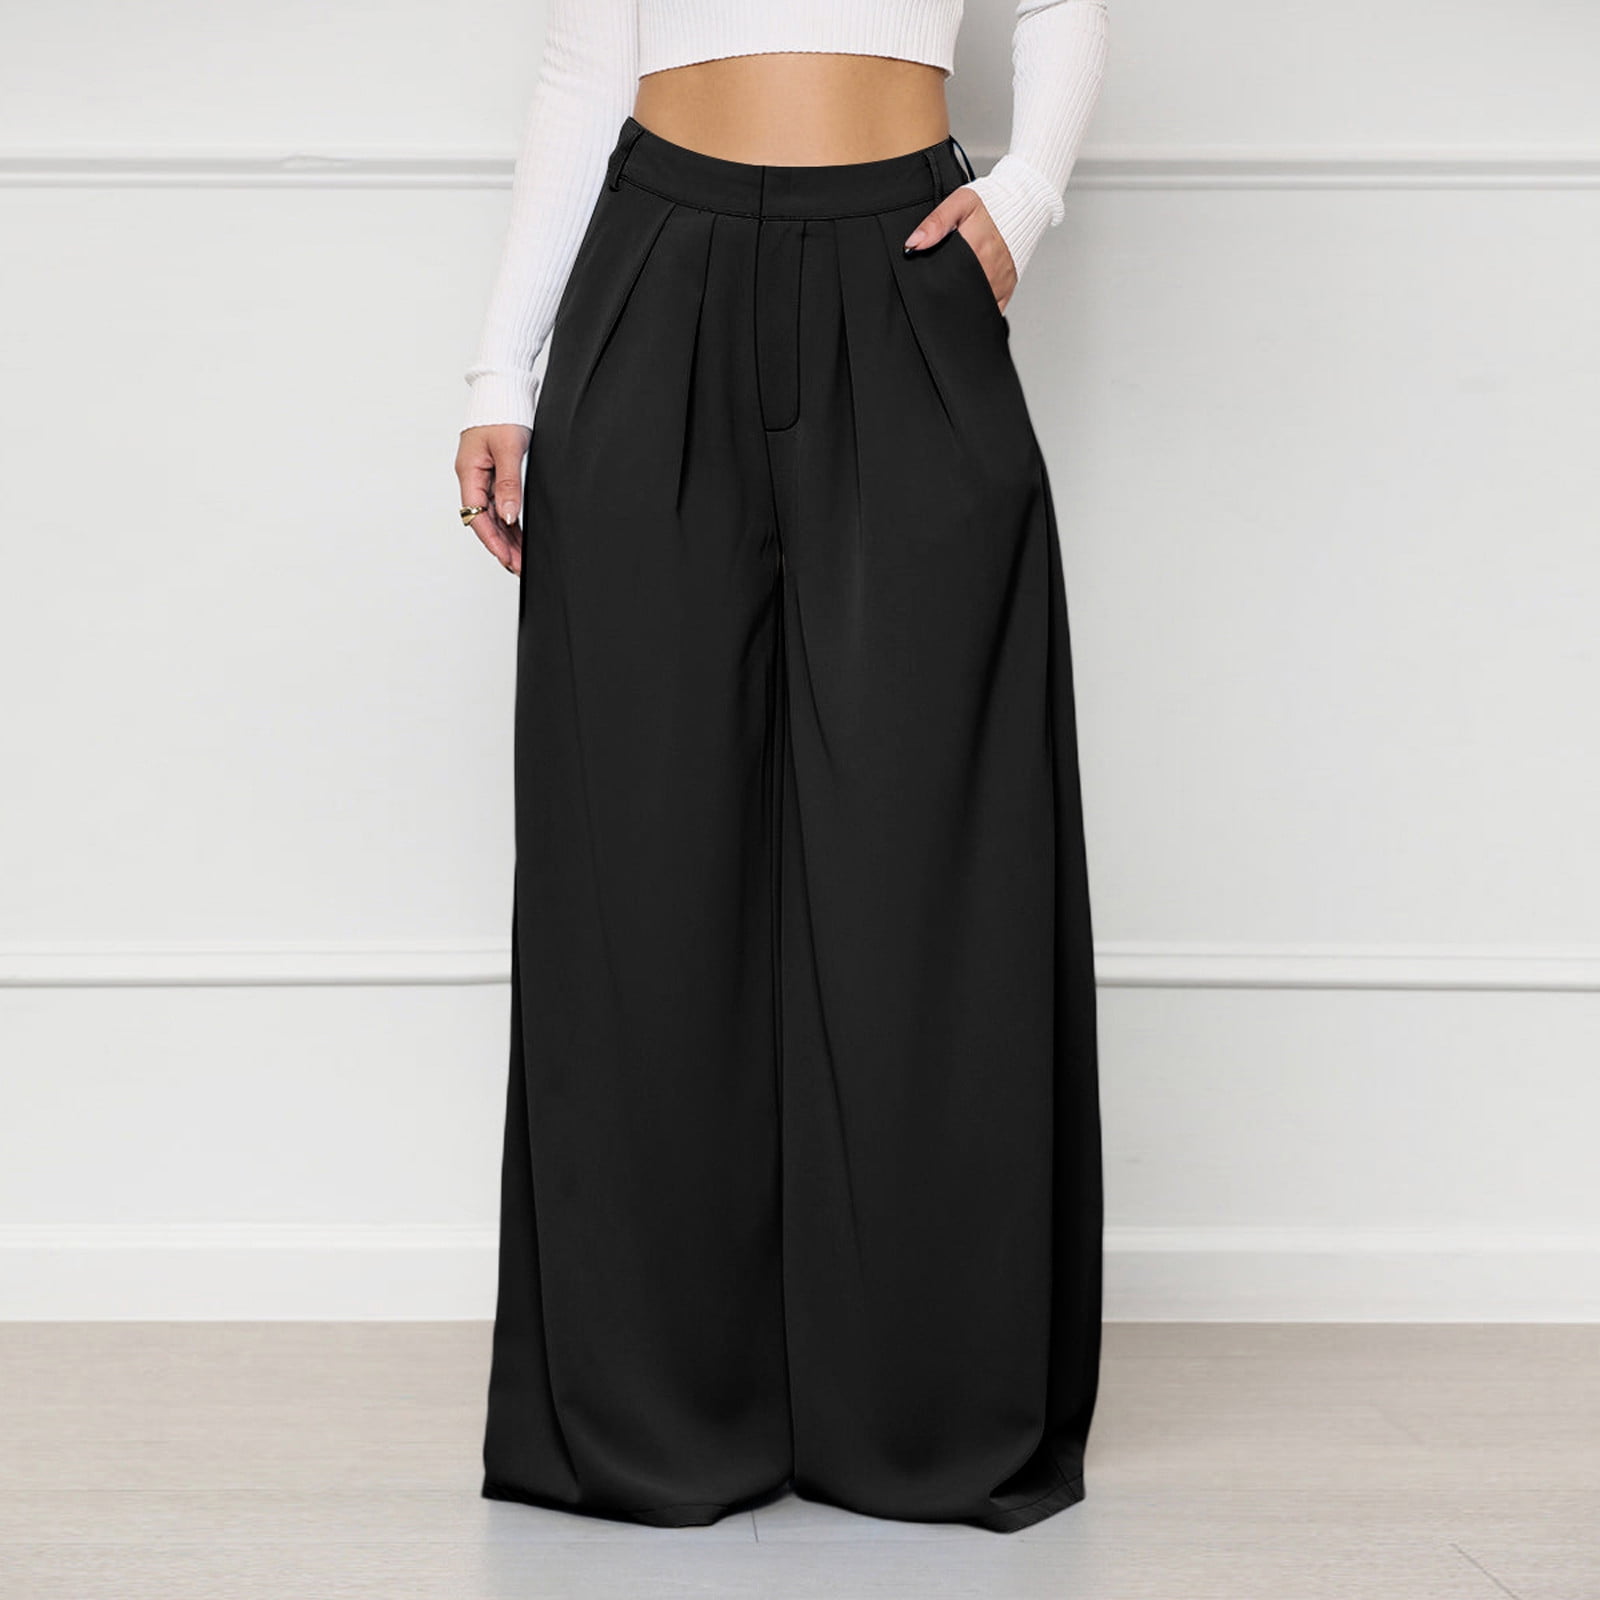 Azrian Womens Pants Clearance,Womens Plus Size Pants Fashion Casual Solid  Elegant High Waist Pockets Wide Leg Flare Trousers Zipper Pant Clearance 